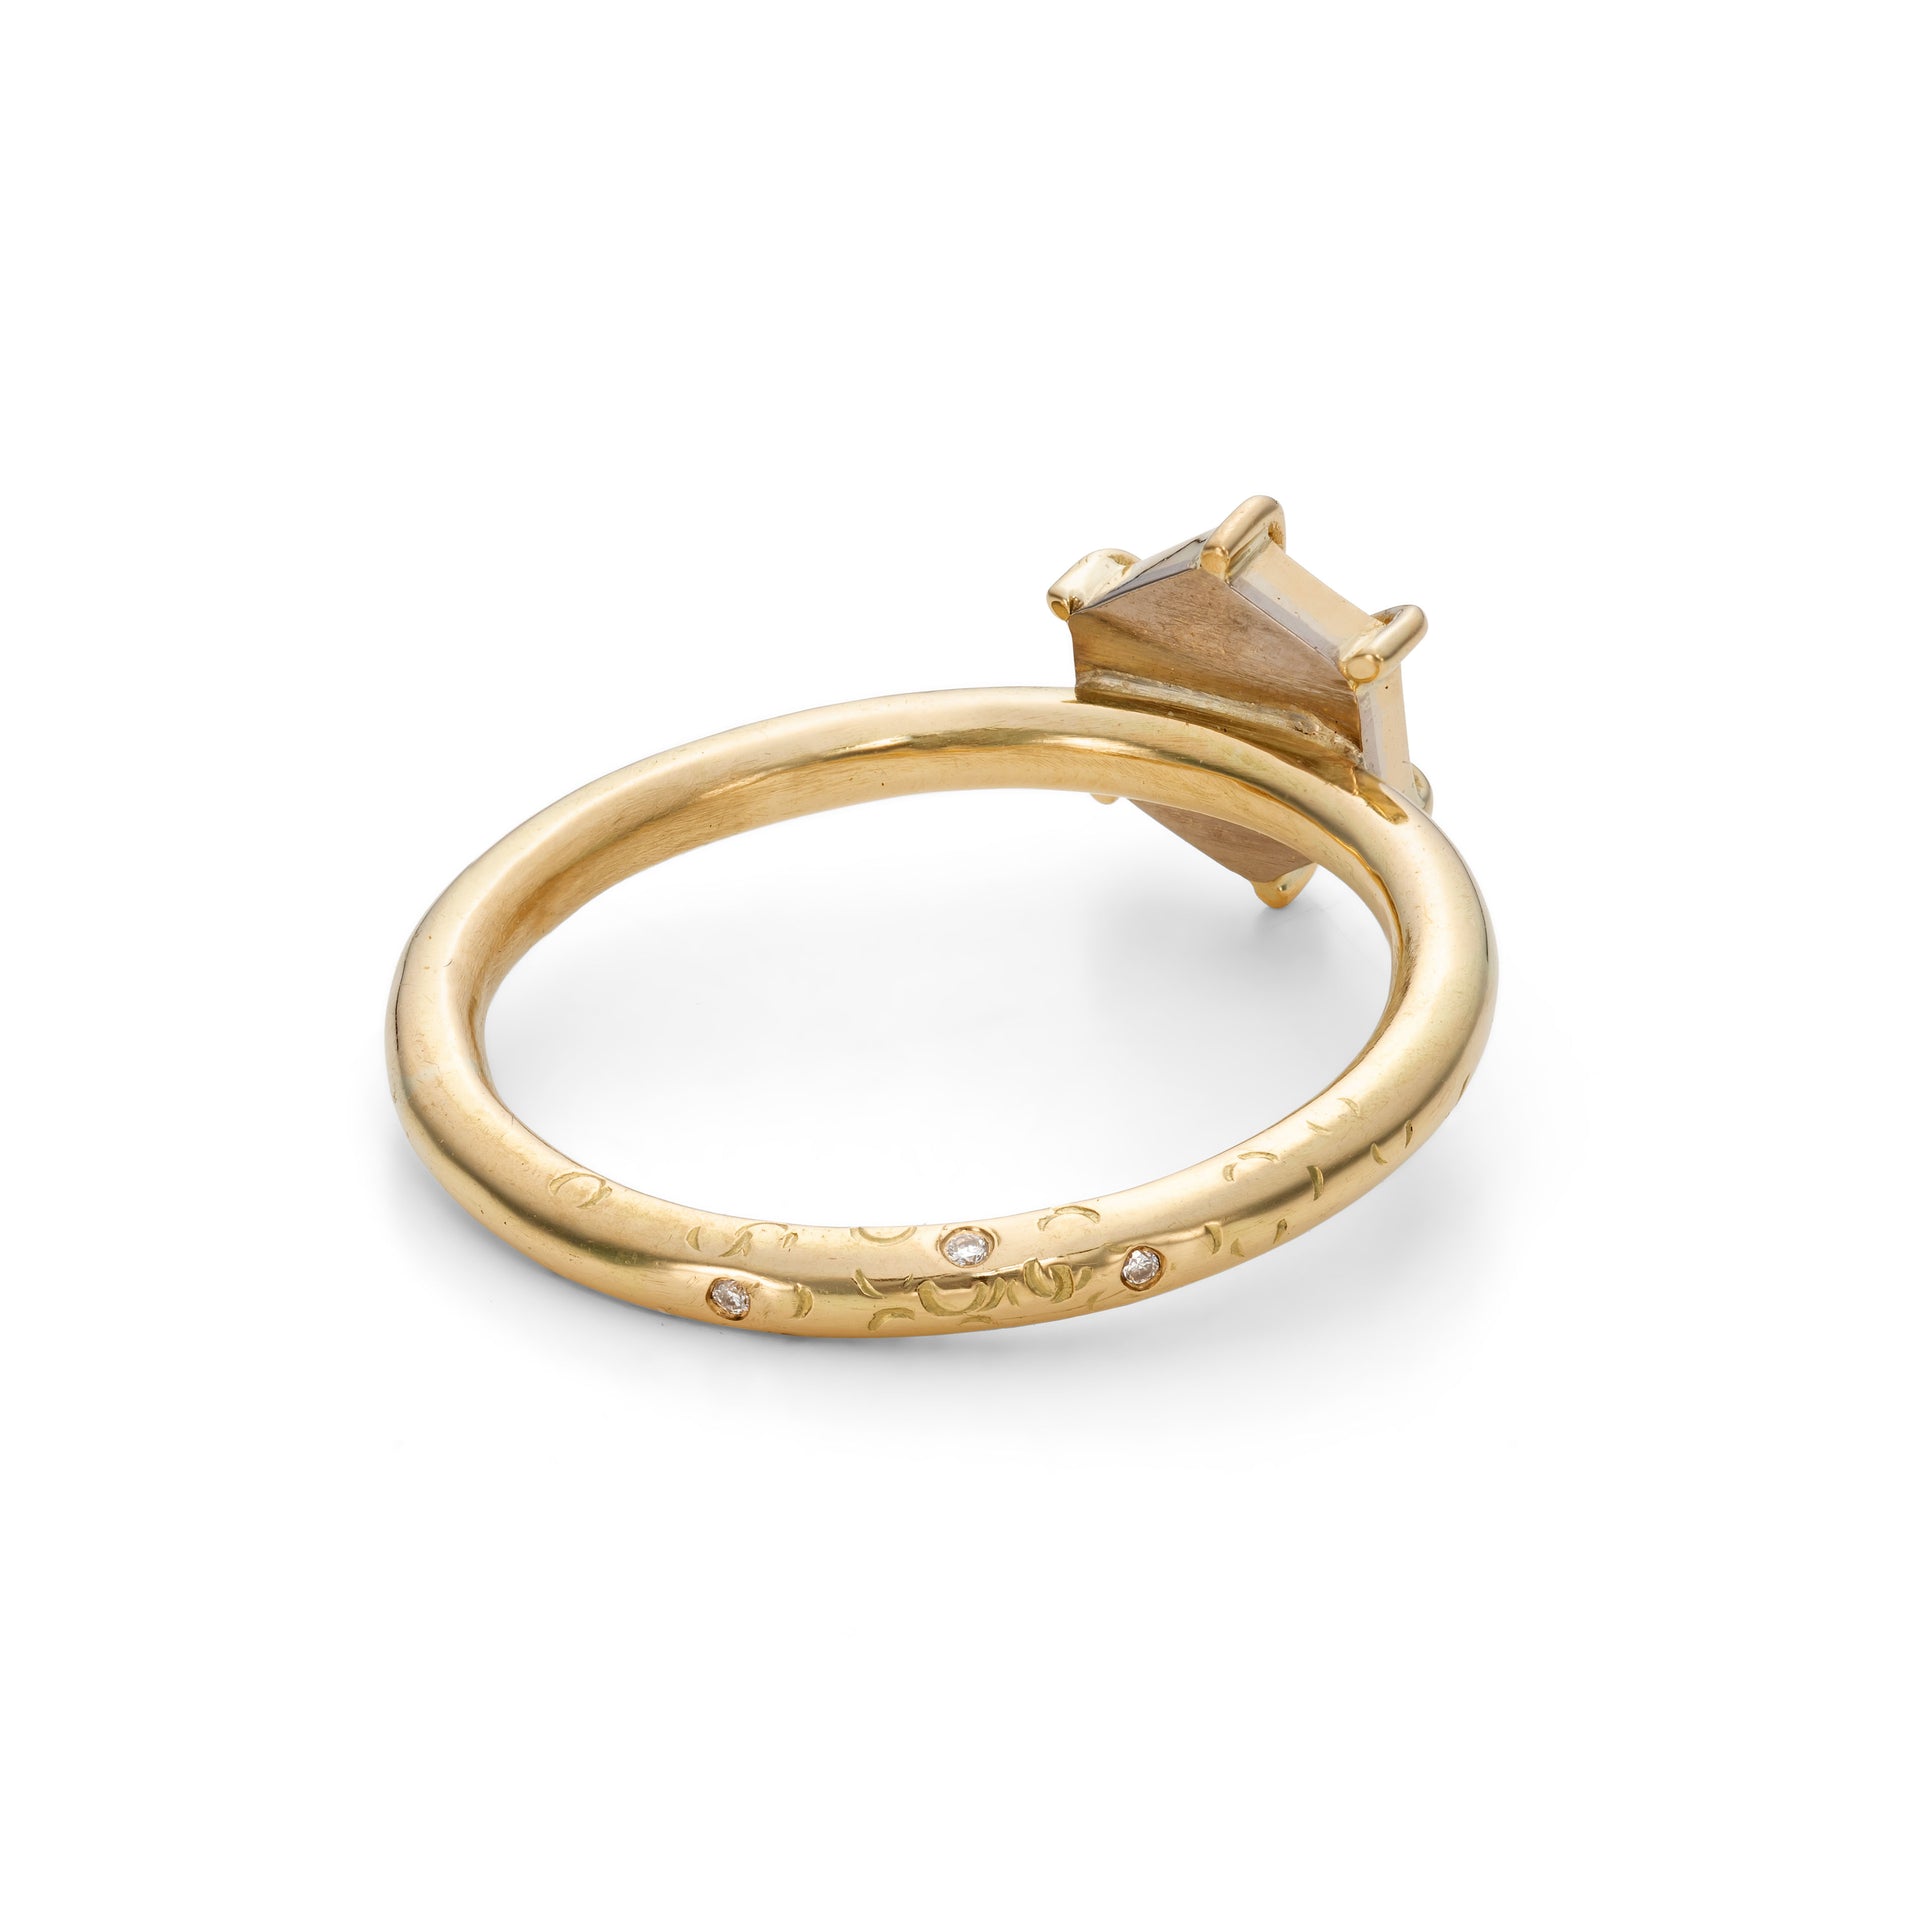 'Dartmoor' Collection Rose cut Misfit diamond claw set contemporary solitaire ring in 18ct yellow and white recycled gold Handmade jewellery by Corrinne Eira Evans